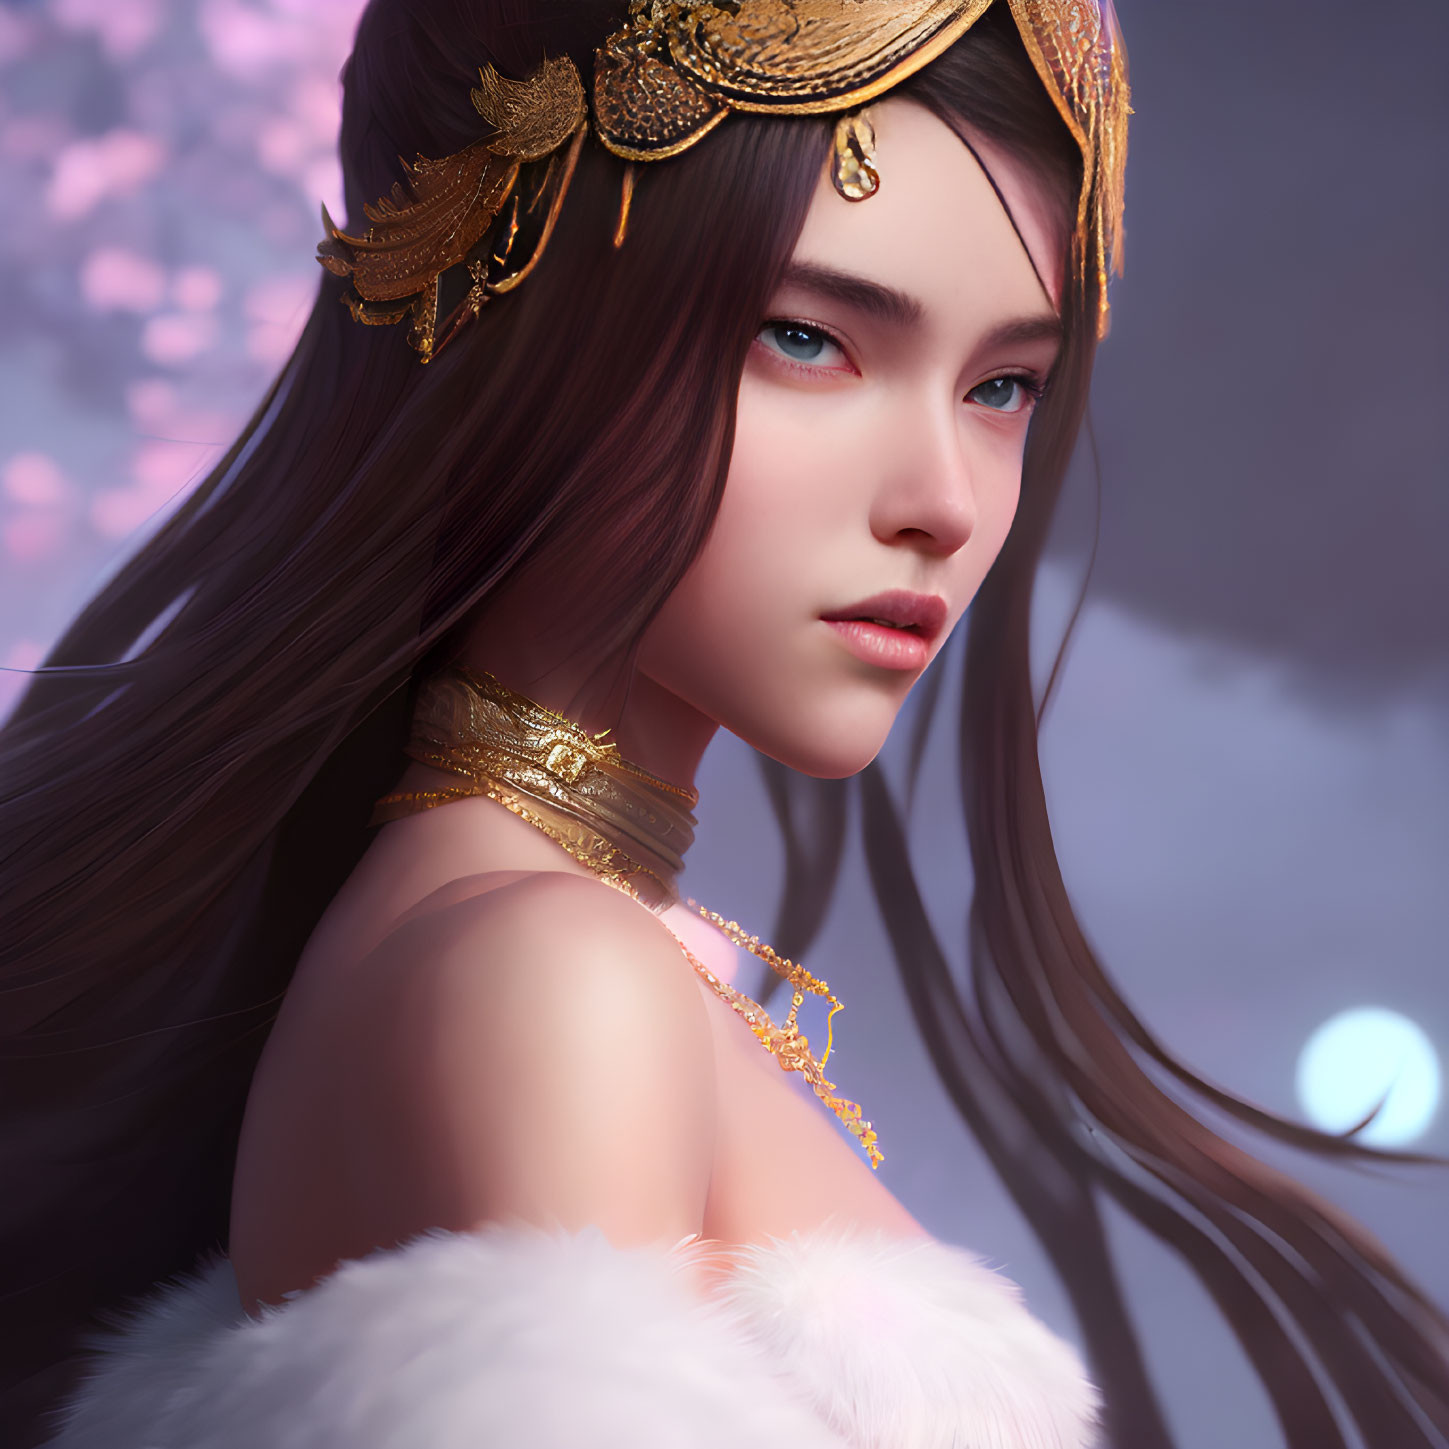 Digital artwork of woman with long brown hair, blue eyes, wearing gold accessories, set against pink blossom